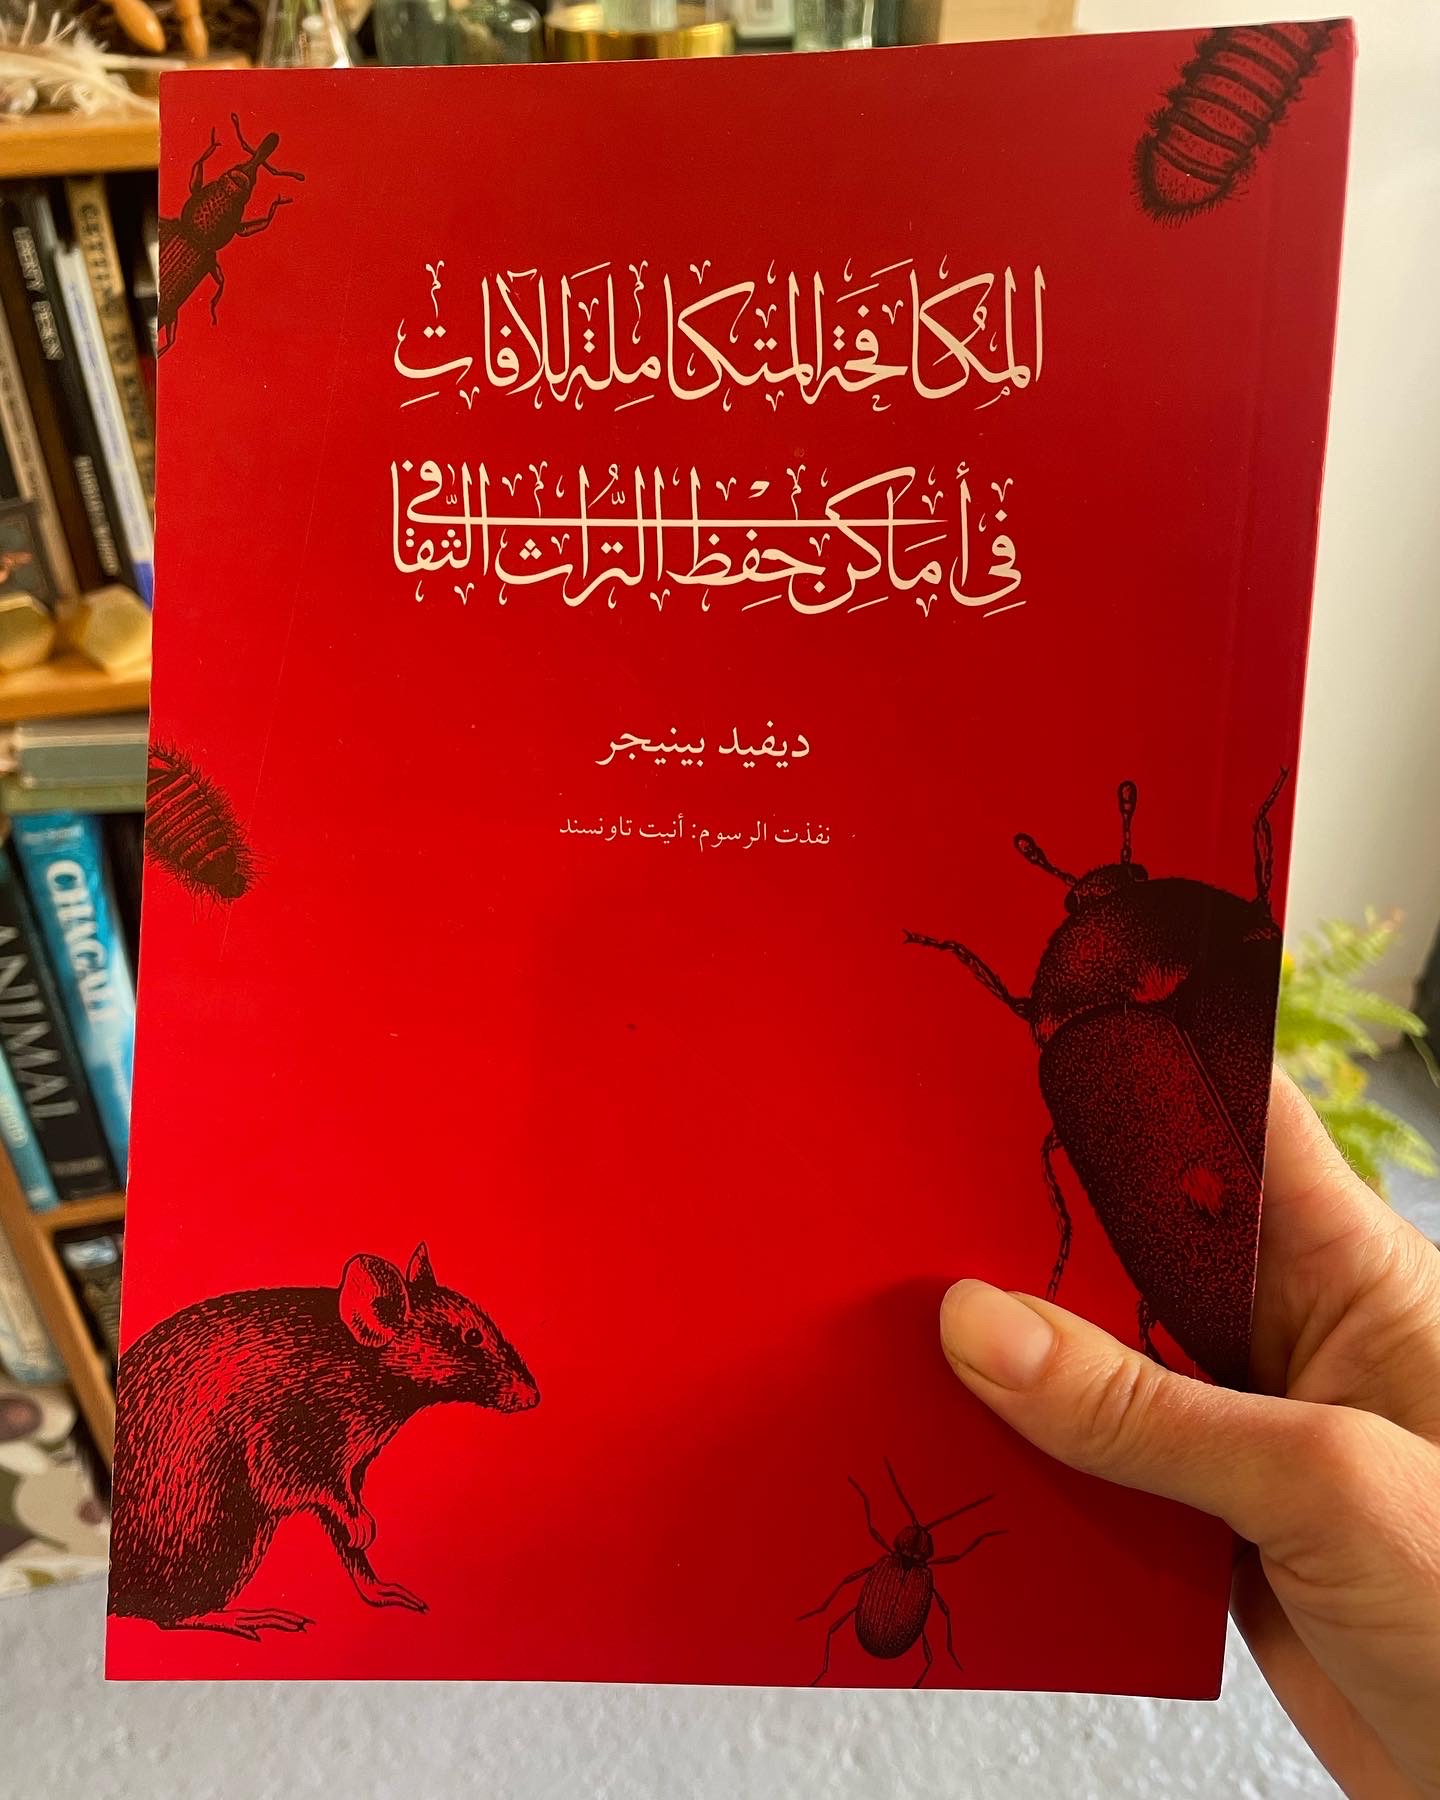 Front cover of the Arabic edition of IPM in Cultural Heritage book with white text on a red background and black insect illustrations